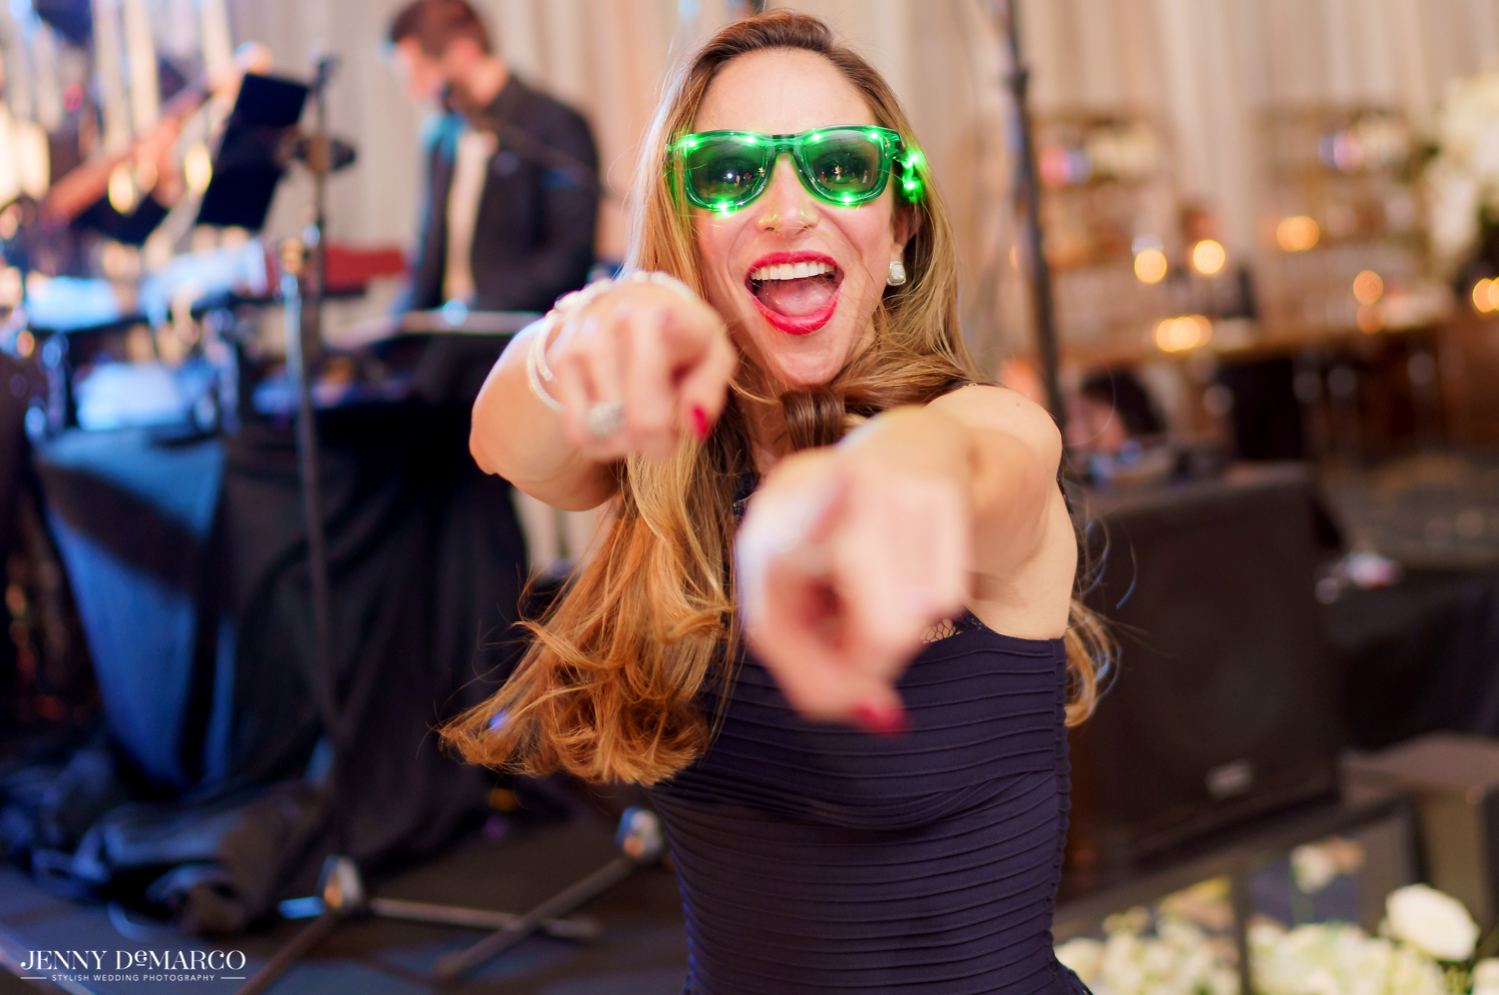 guests dancing at the wedding reception with fun sunglasses on